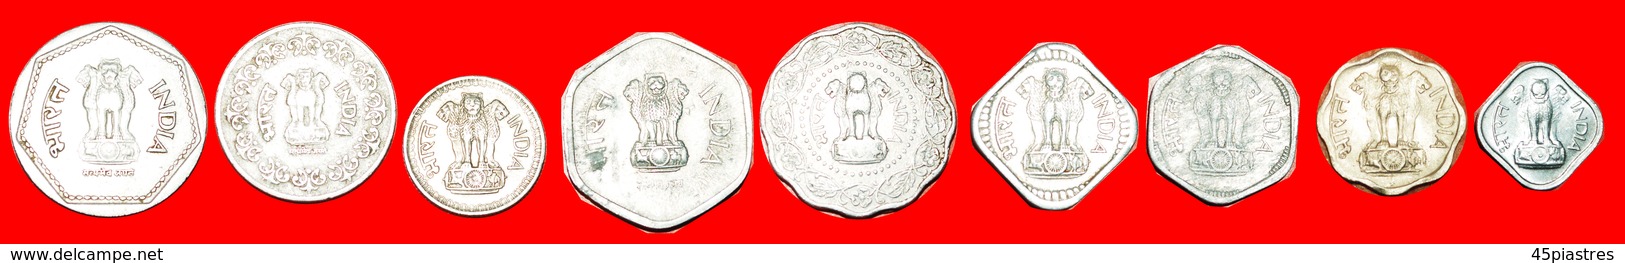 + SET 9 COINS: INDIA ★ 1-2-3-5-10-20-25-50 PAISE  - 1 RUPEE TYPE 1964-1991! LOW START ★ NO RESERVE! - Lots & Kiloware - Coins